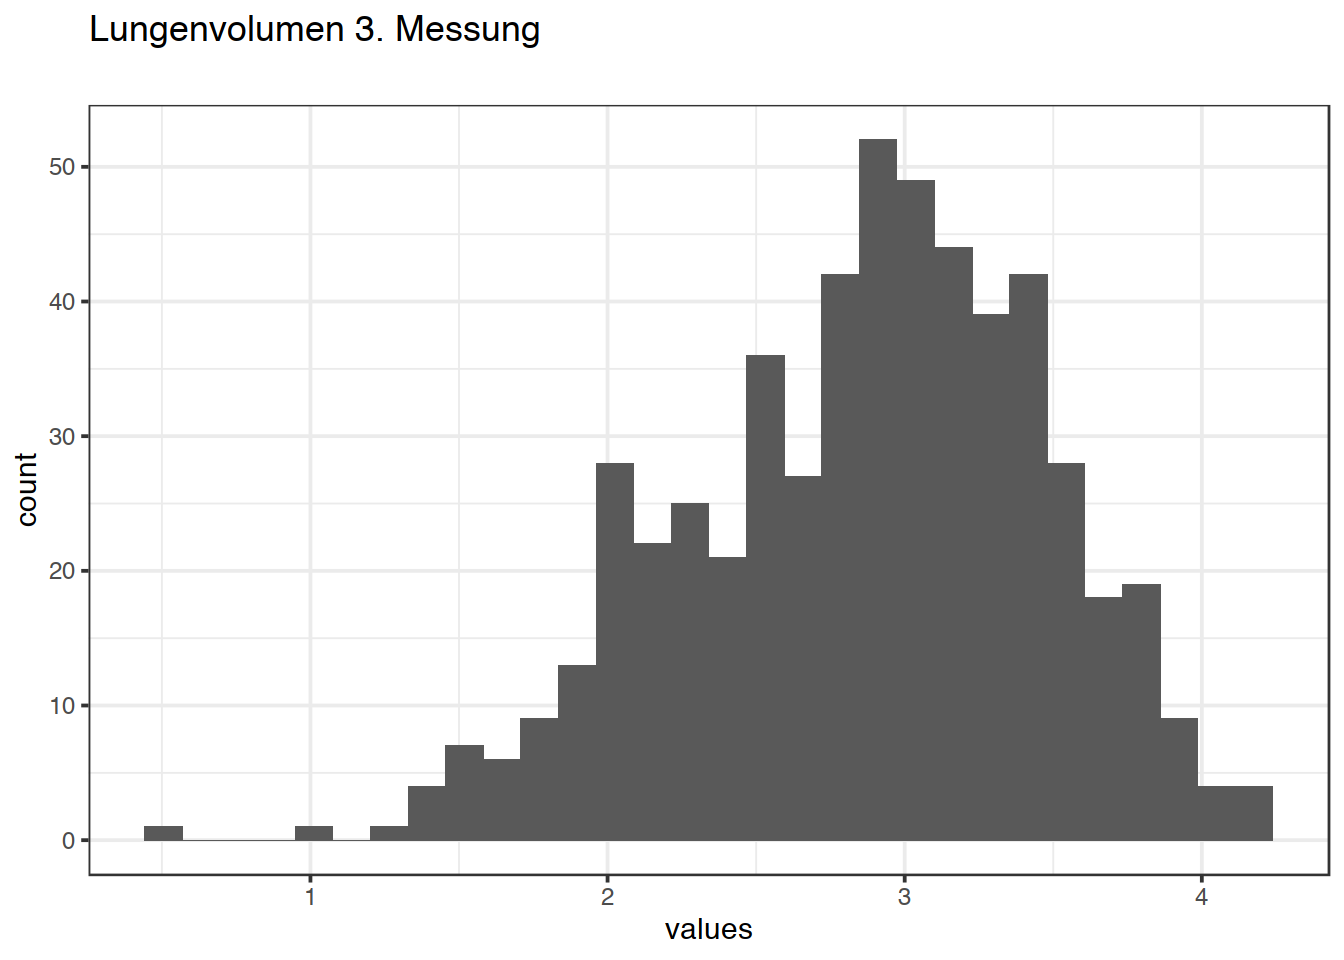 Distribution of values for Lungenvolumen 3. Messung